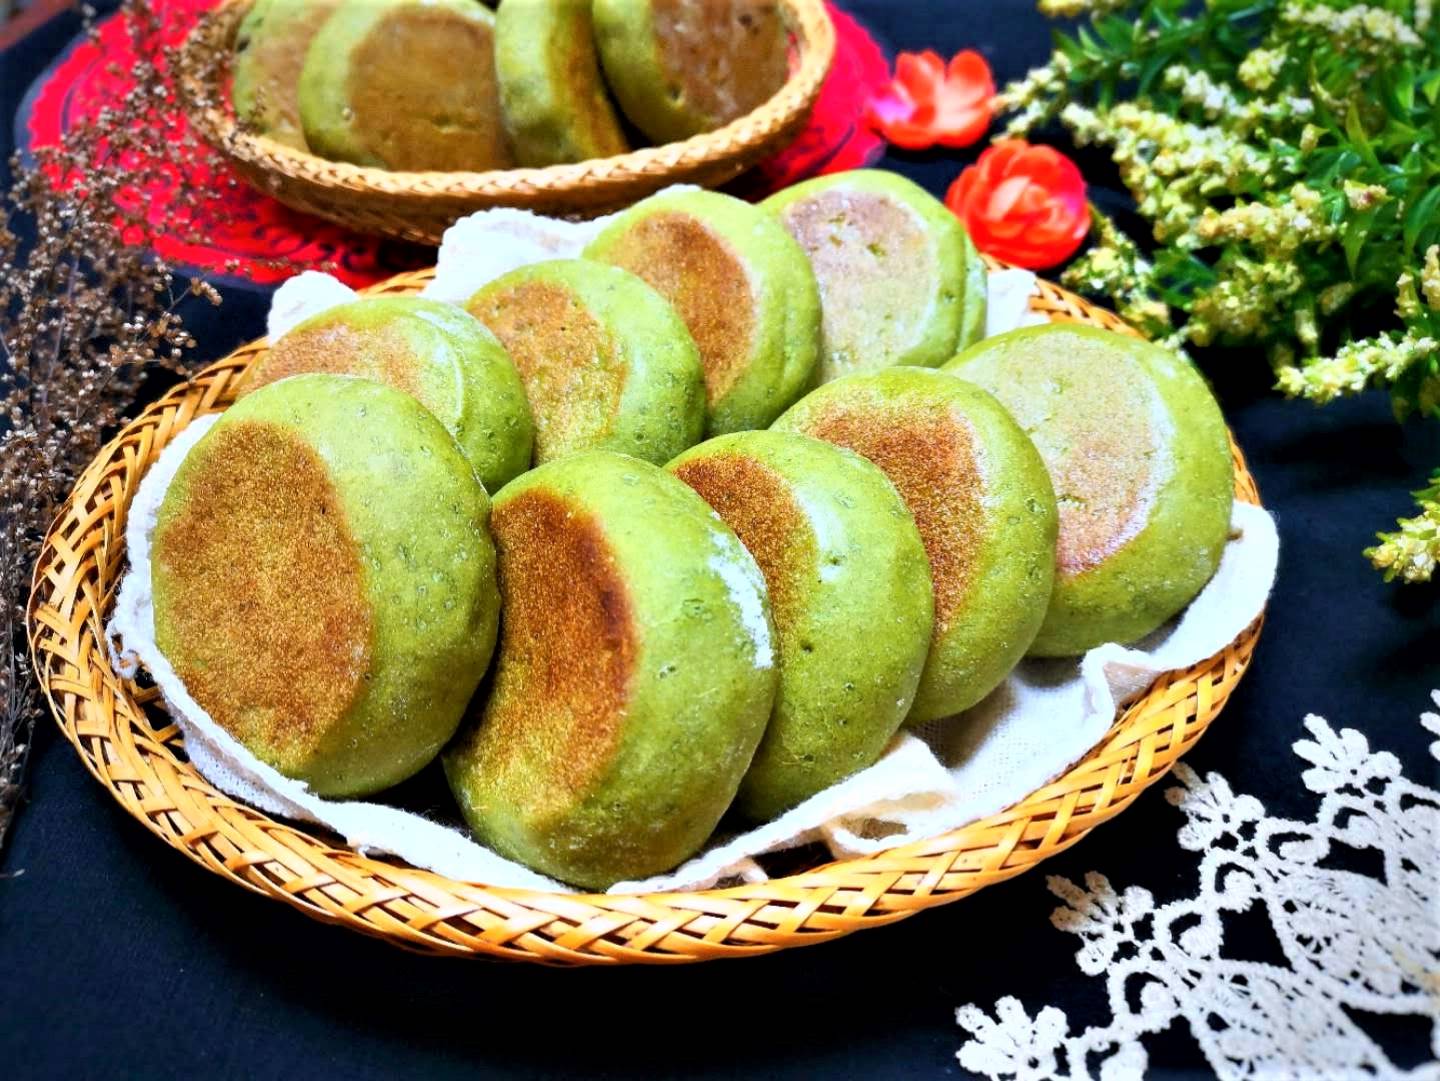 Spinach pancake with red bean filling Healthy breakfast